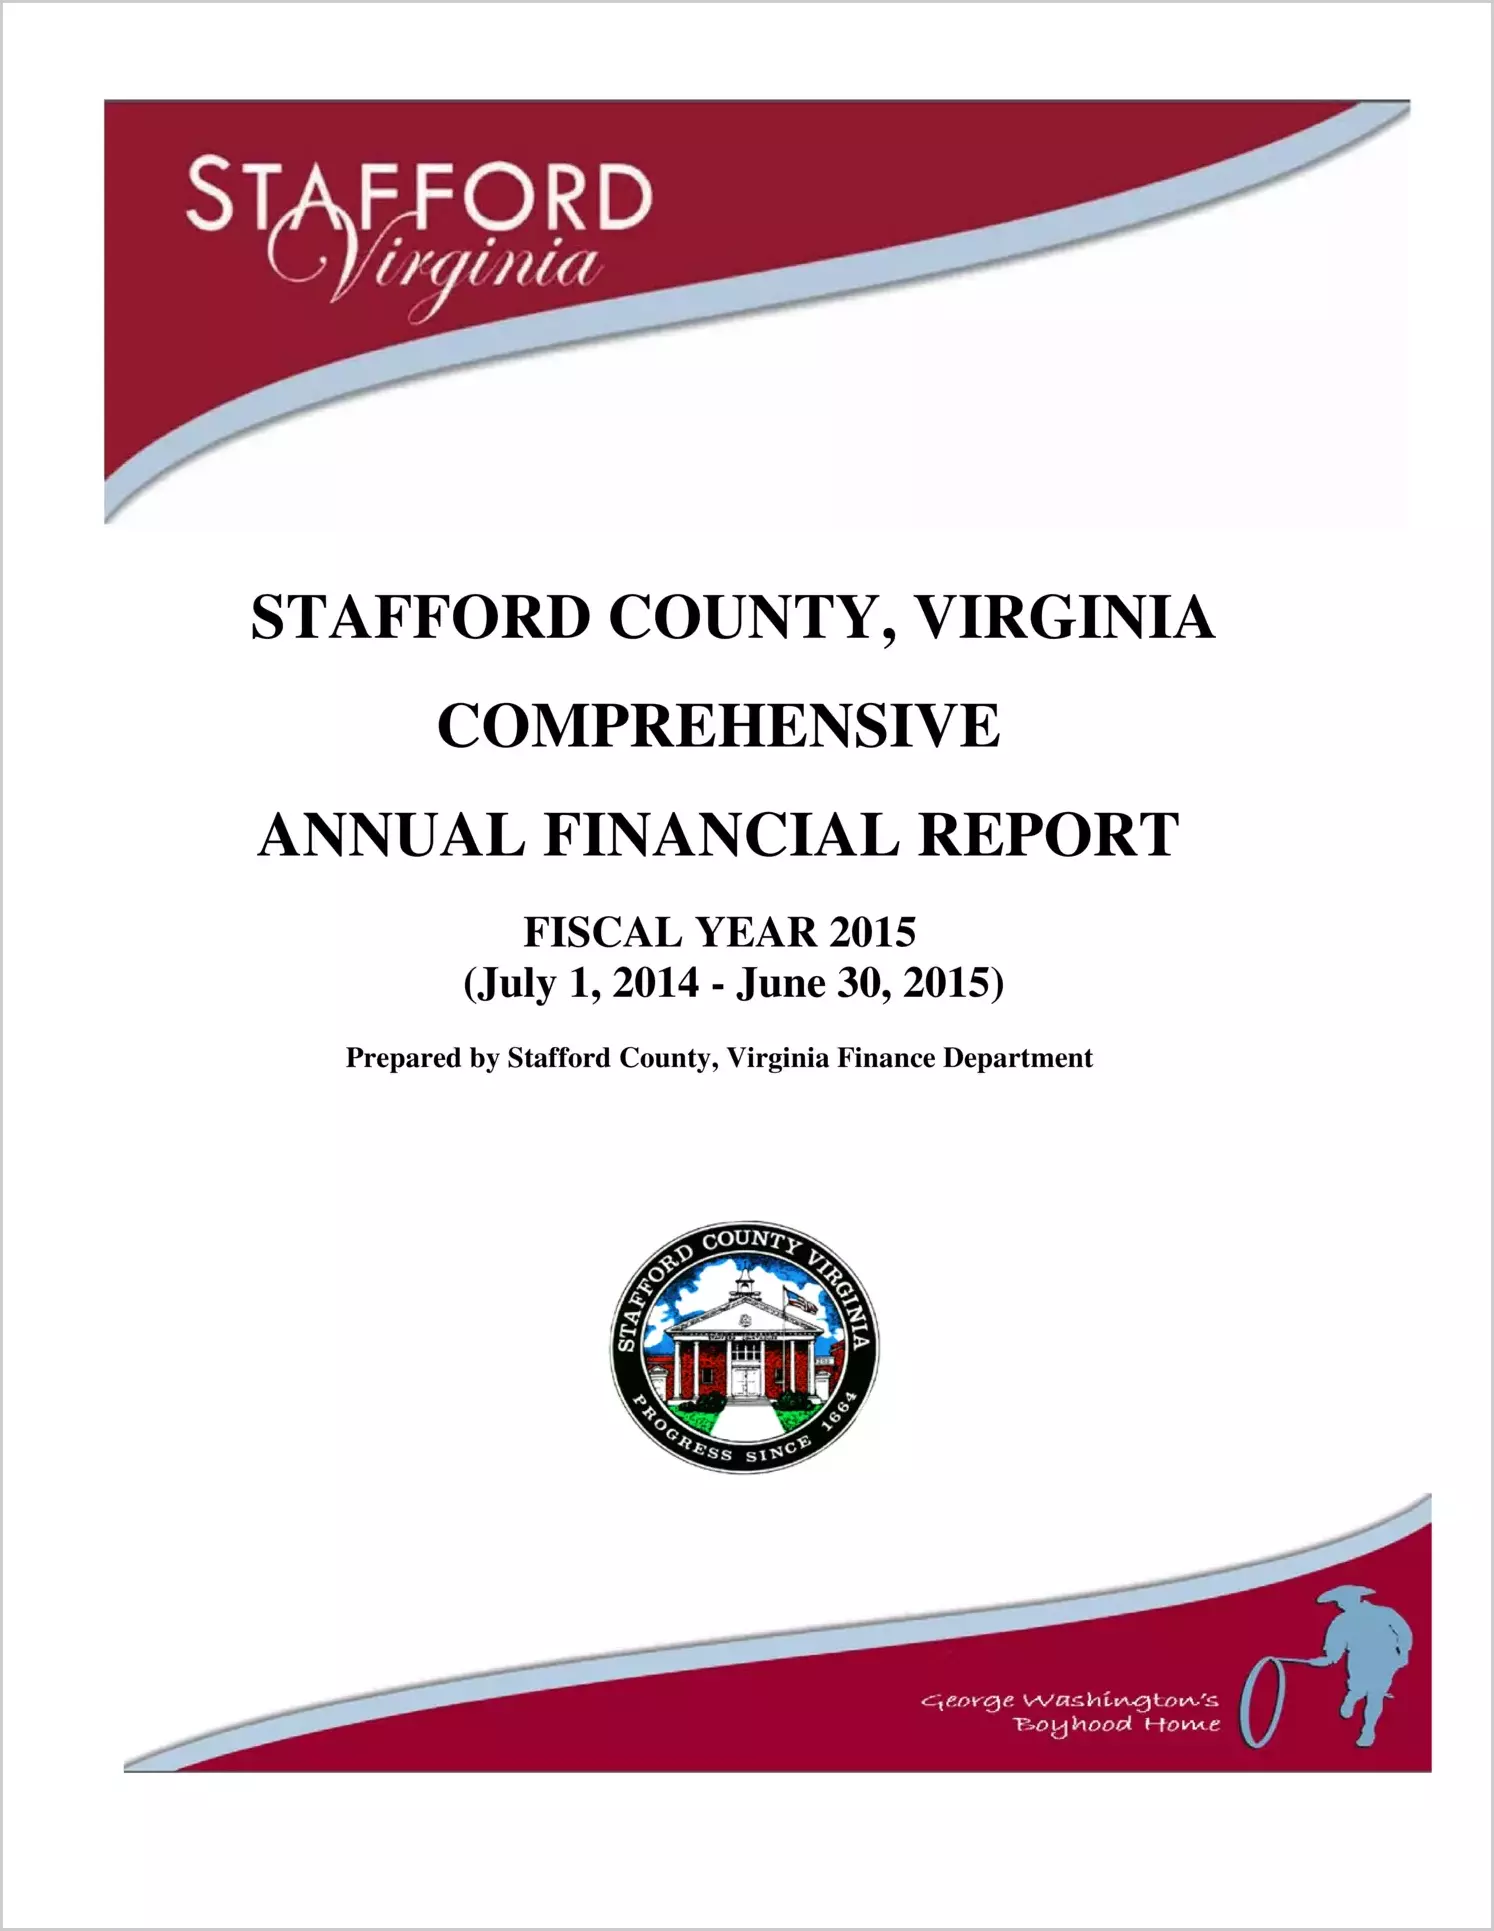 2015 Annual Financial Report for County of Stafford